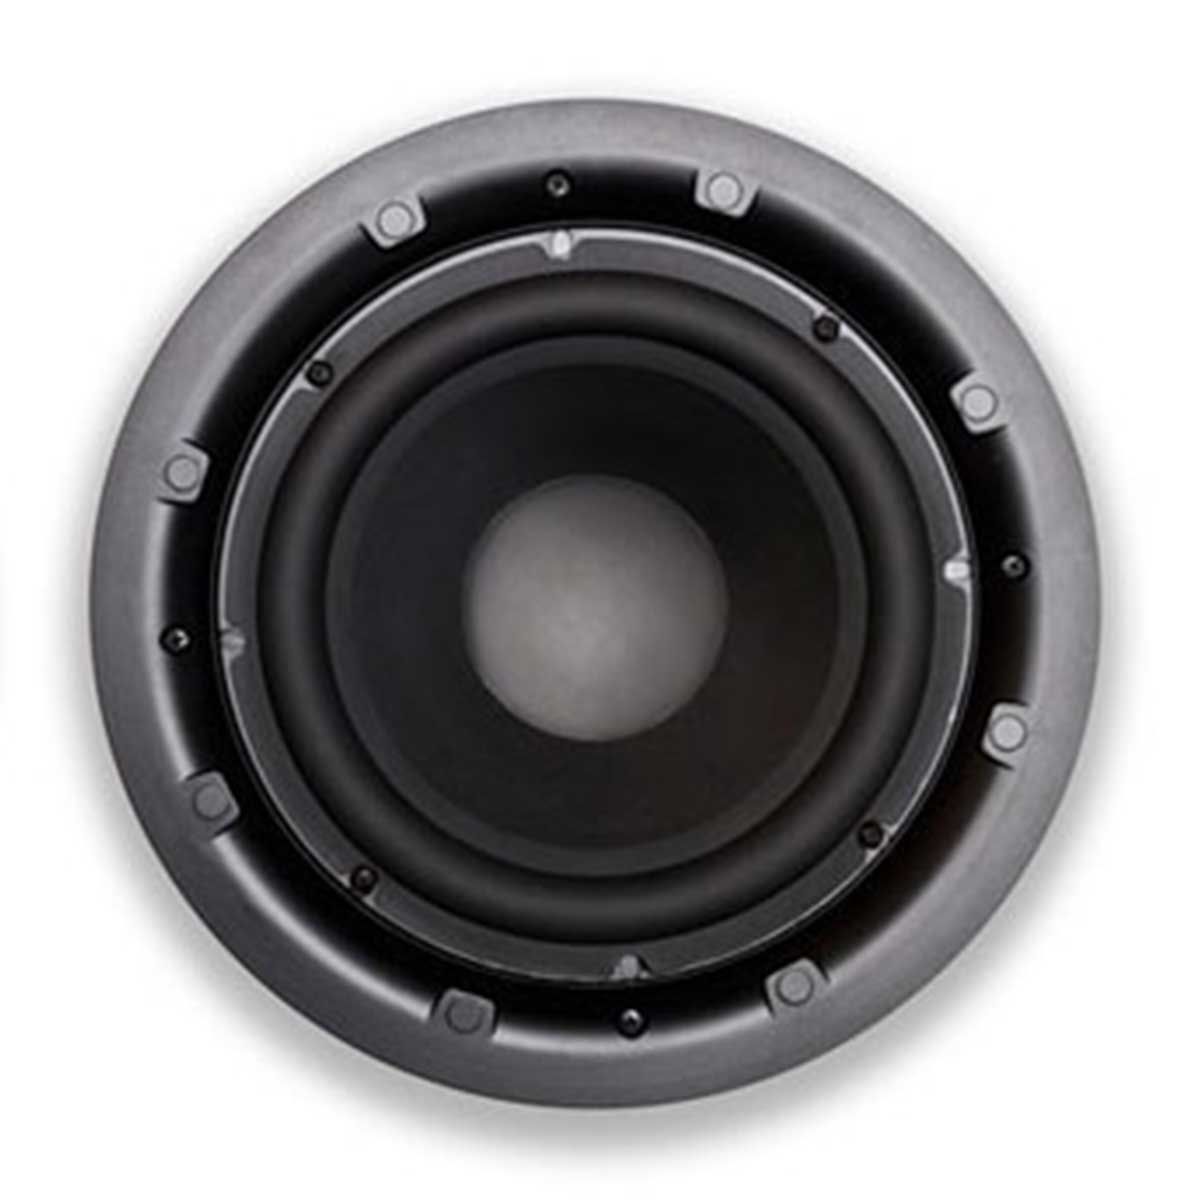 Cambridge Audio C200B In-Ceiling Subwoofer without grill